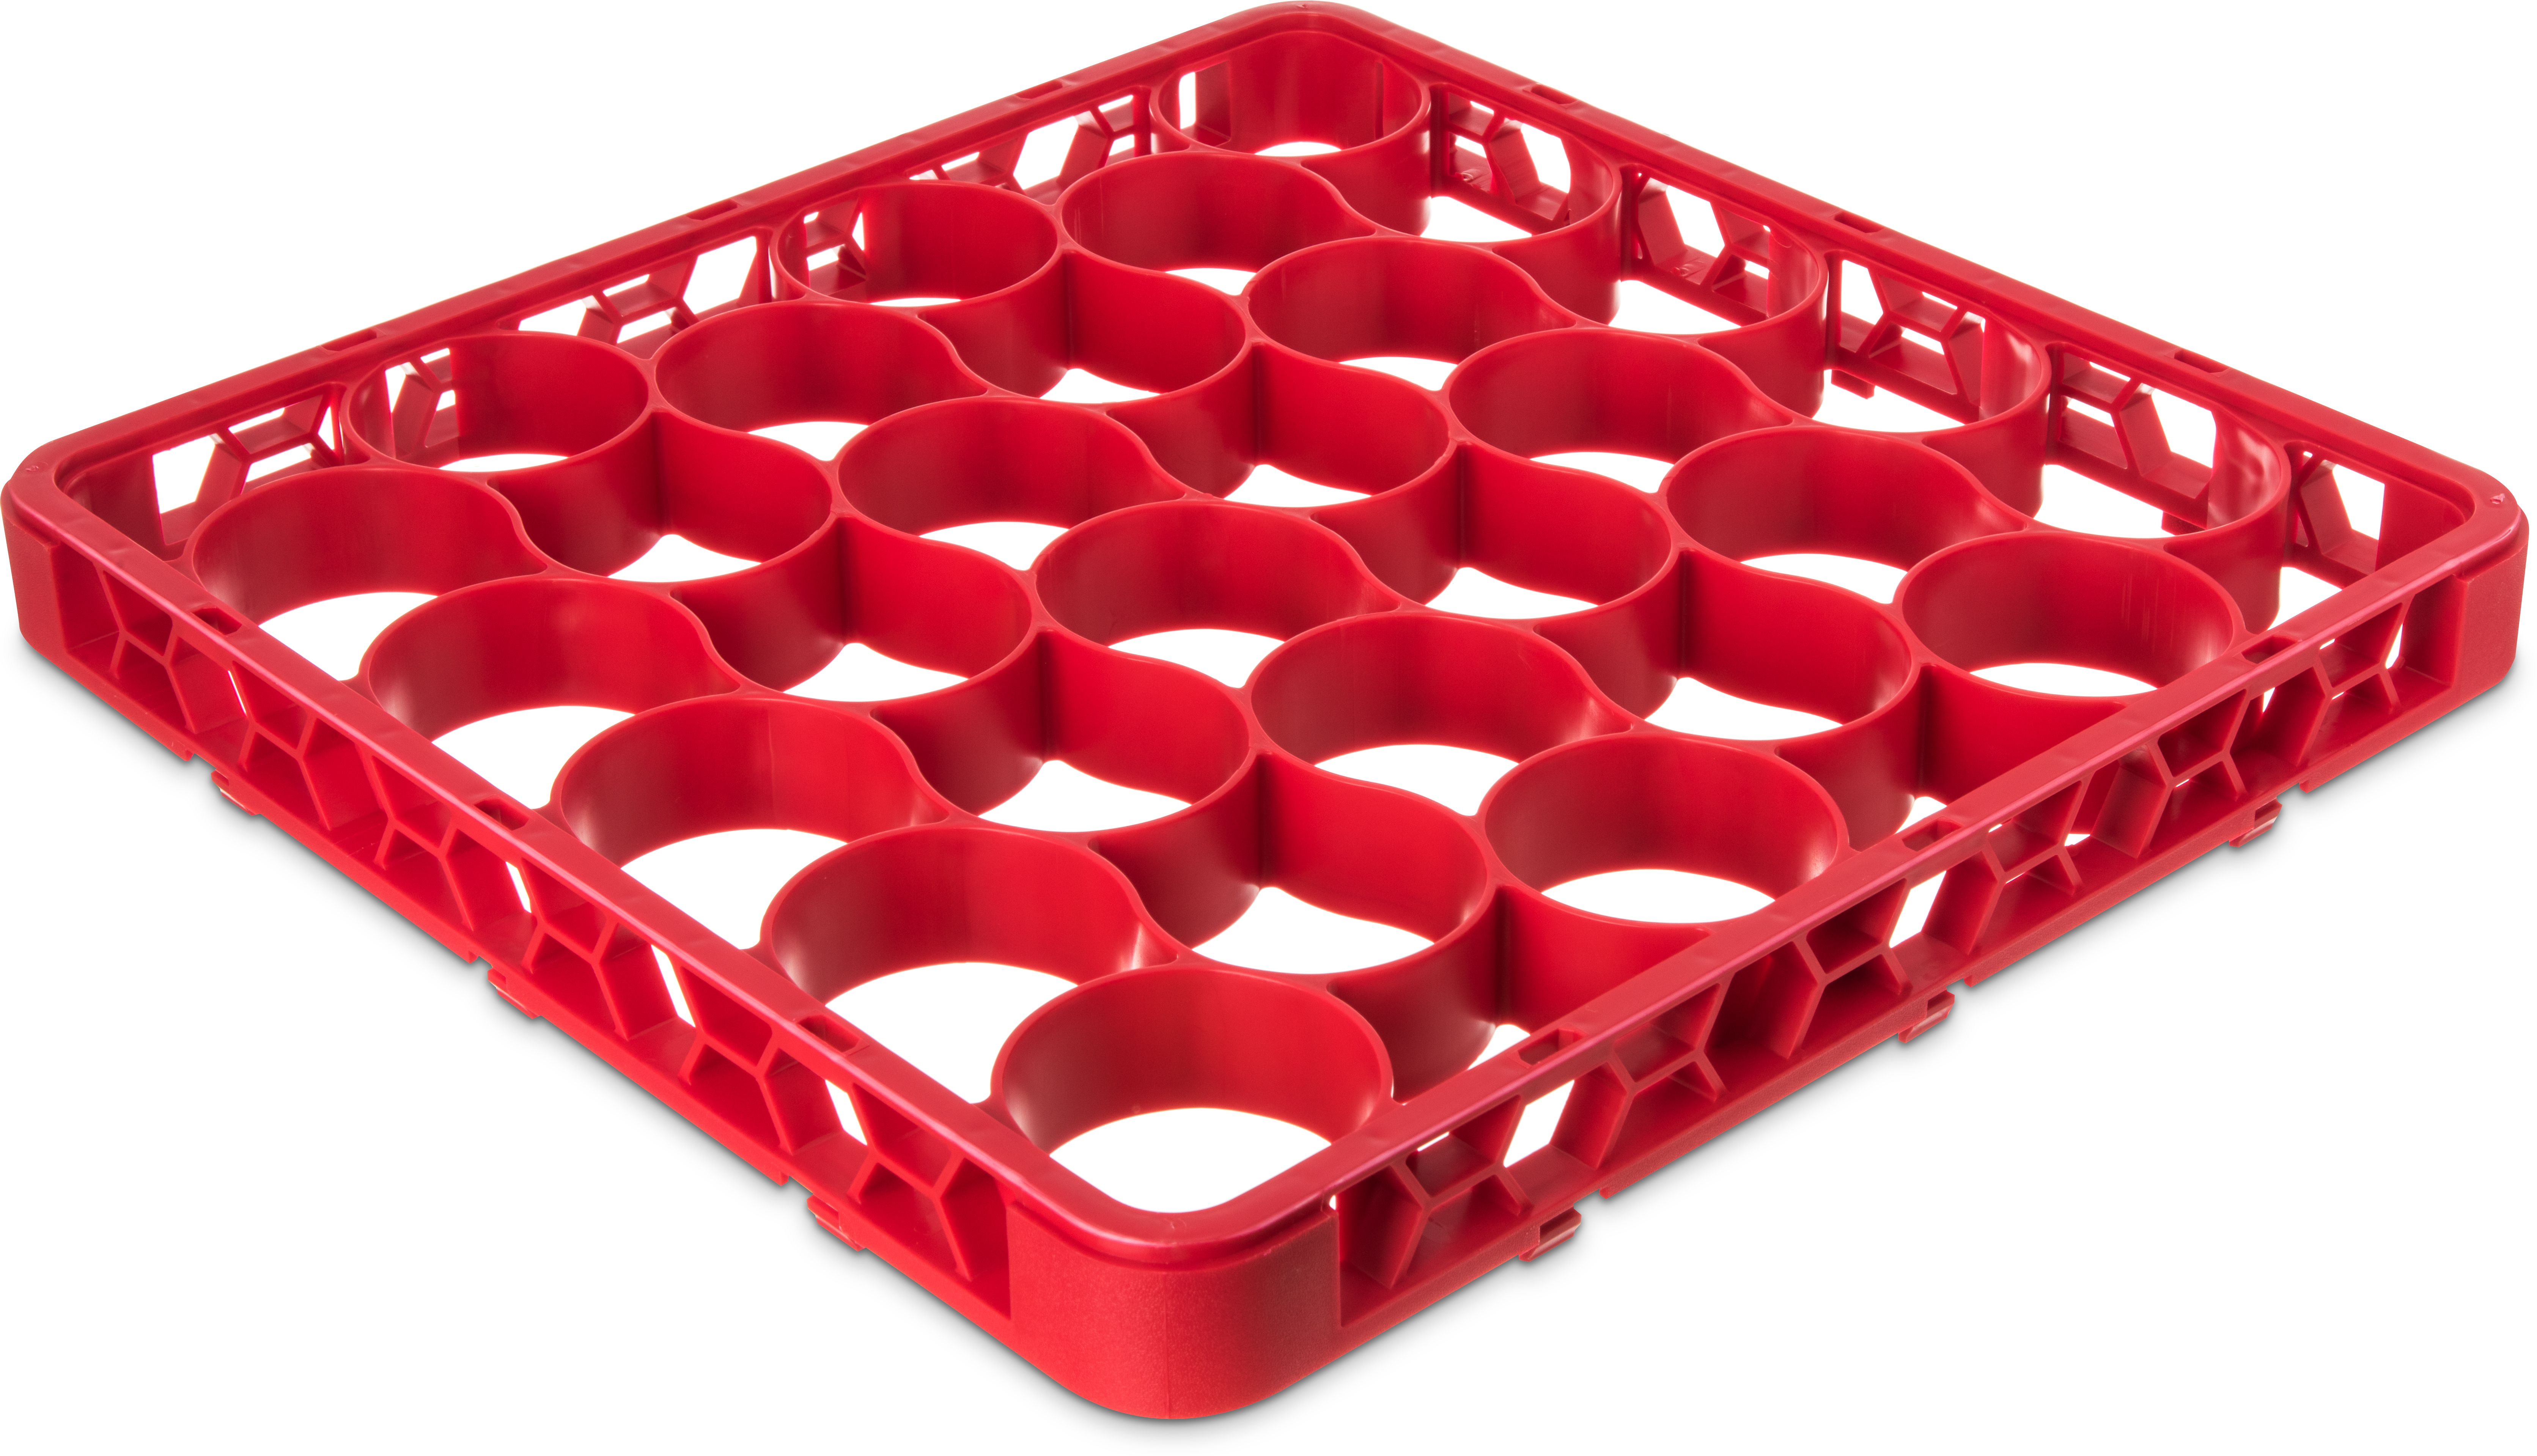 Color-Coded Short Glass Rack Extender 30 Compartment - Red